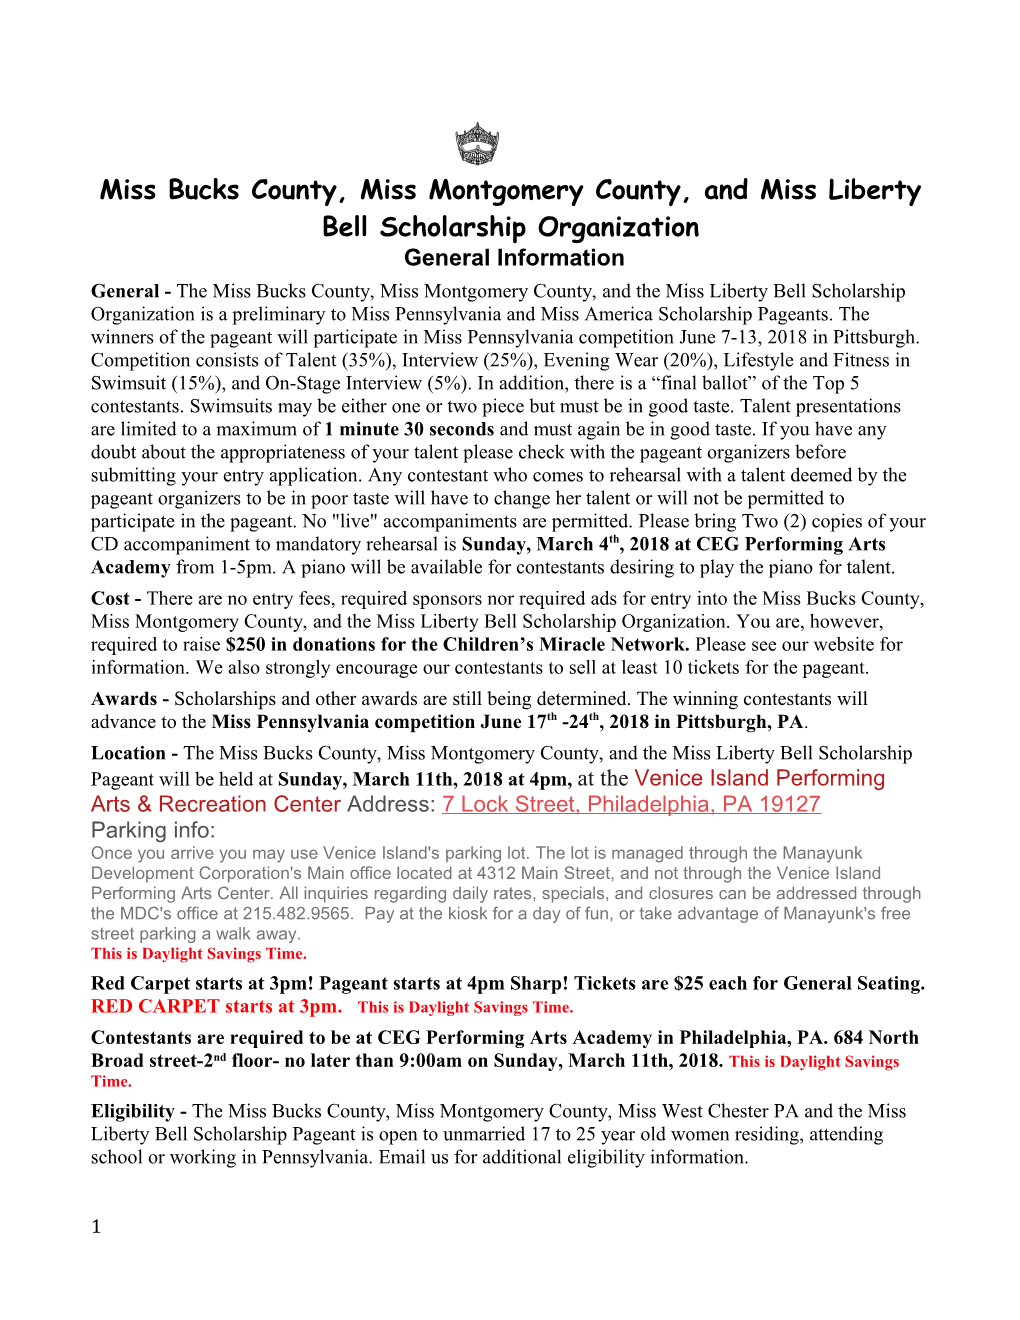 Miss Bucks County, Miss Montgomery County, and Miss Liberty Bell Scholarship Organization